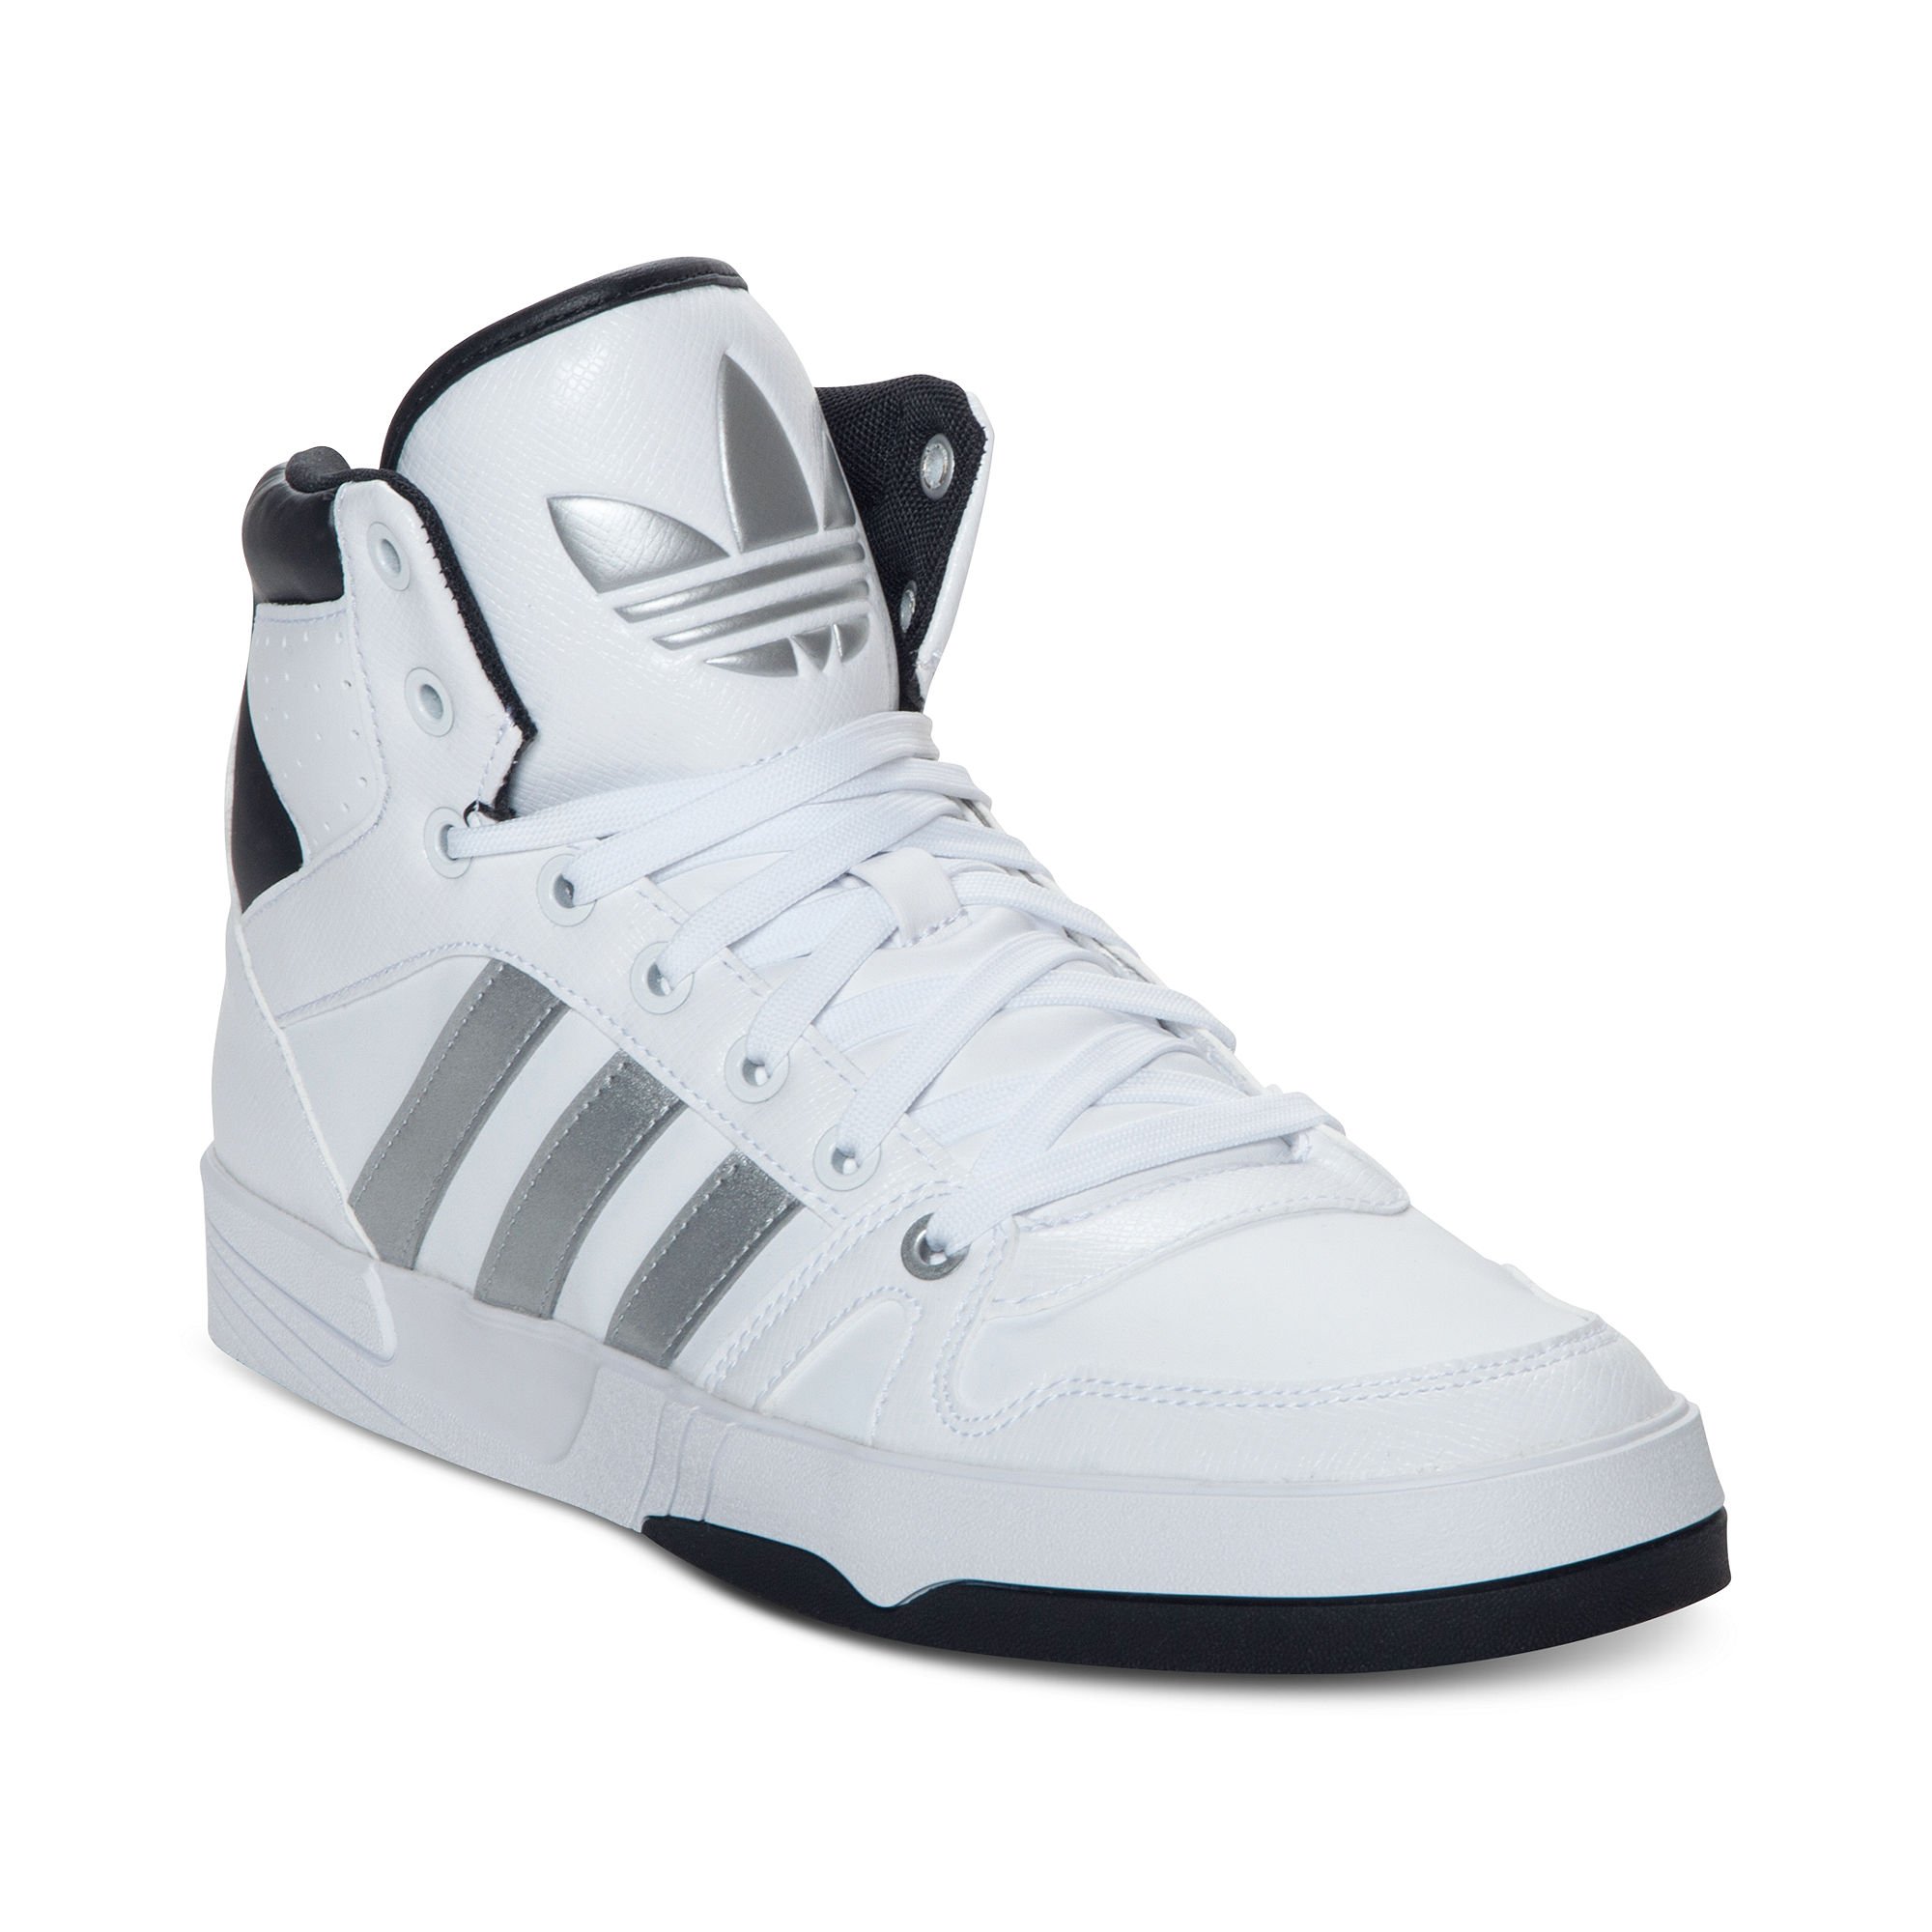 Lyst - Adidas Court Pro Casual Sneakers in White for Men